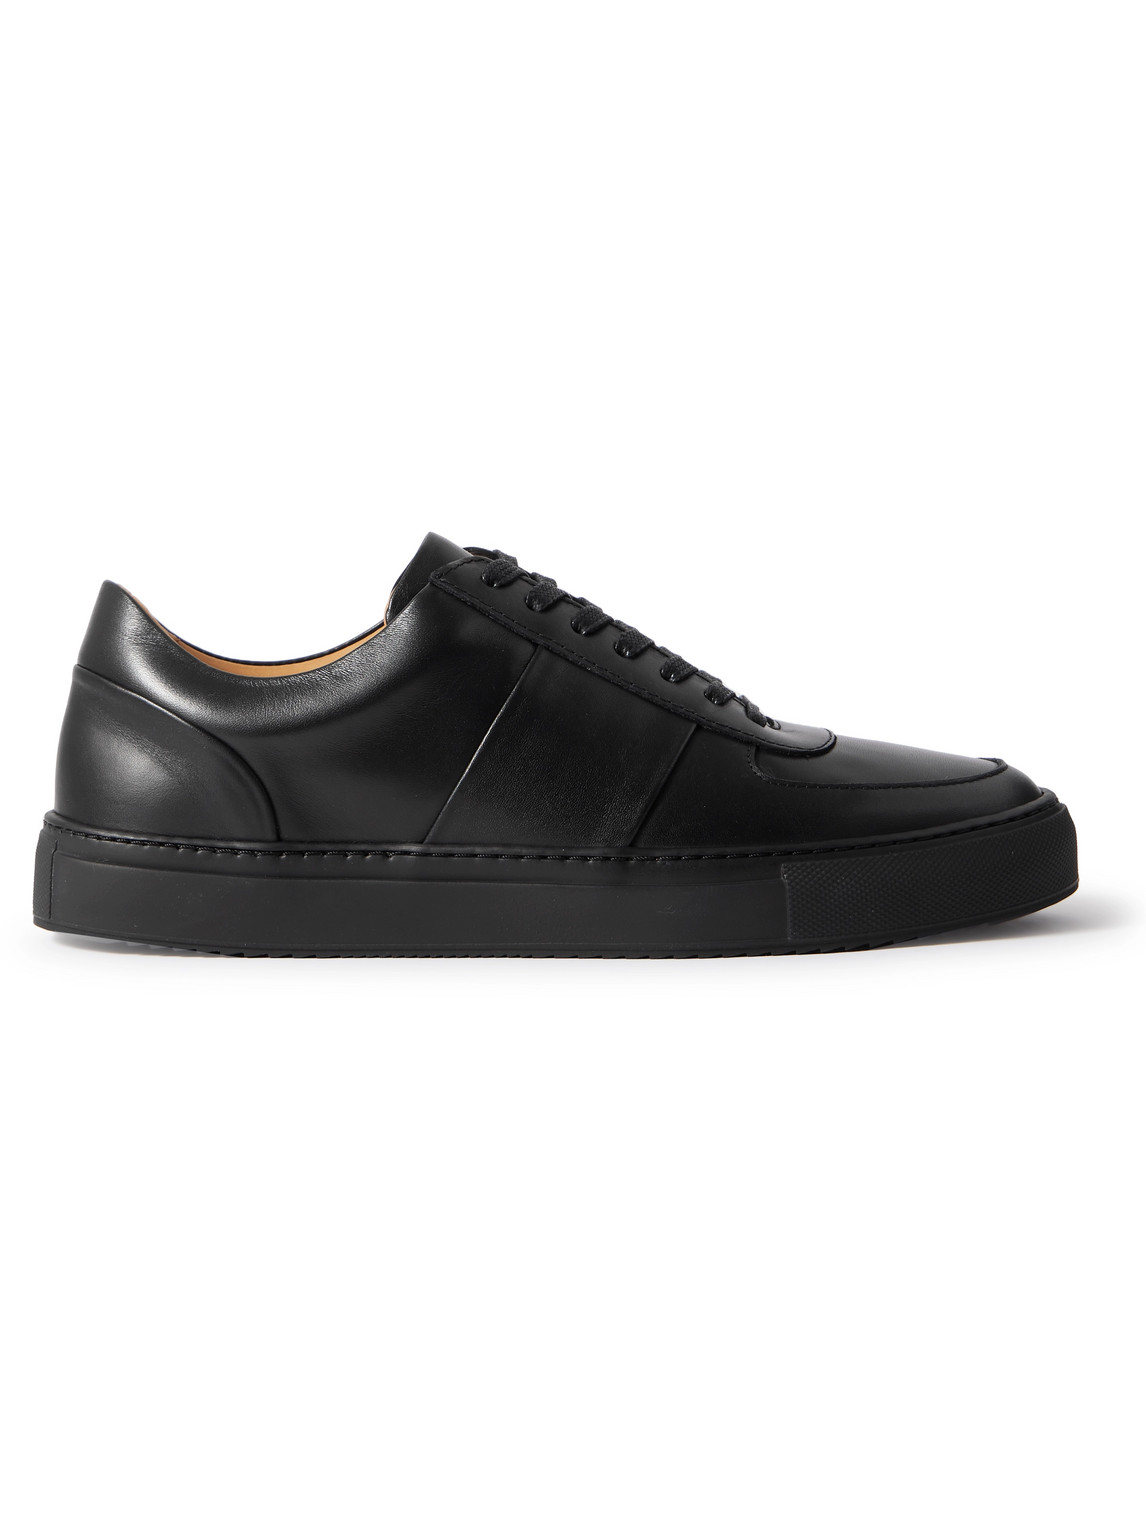 Mr P. Larry Leather Sneakers In Black